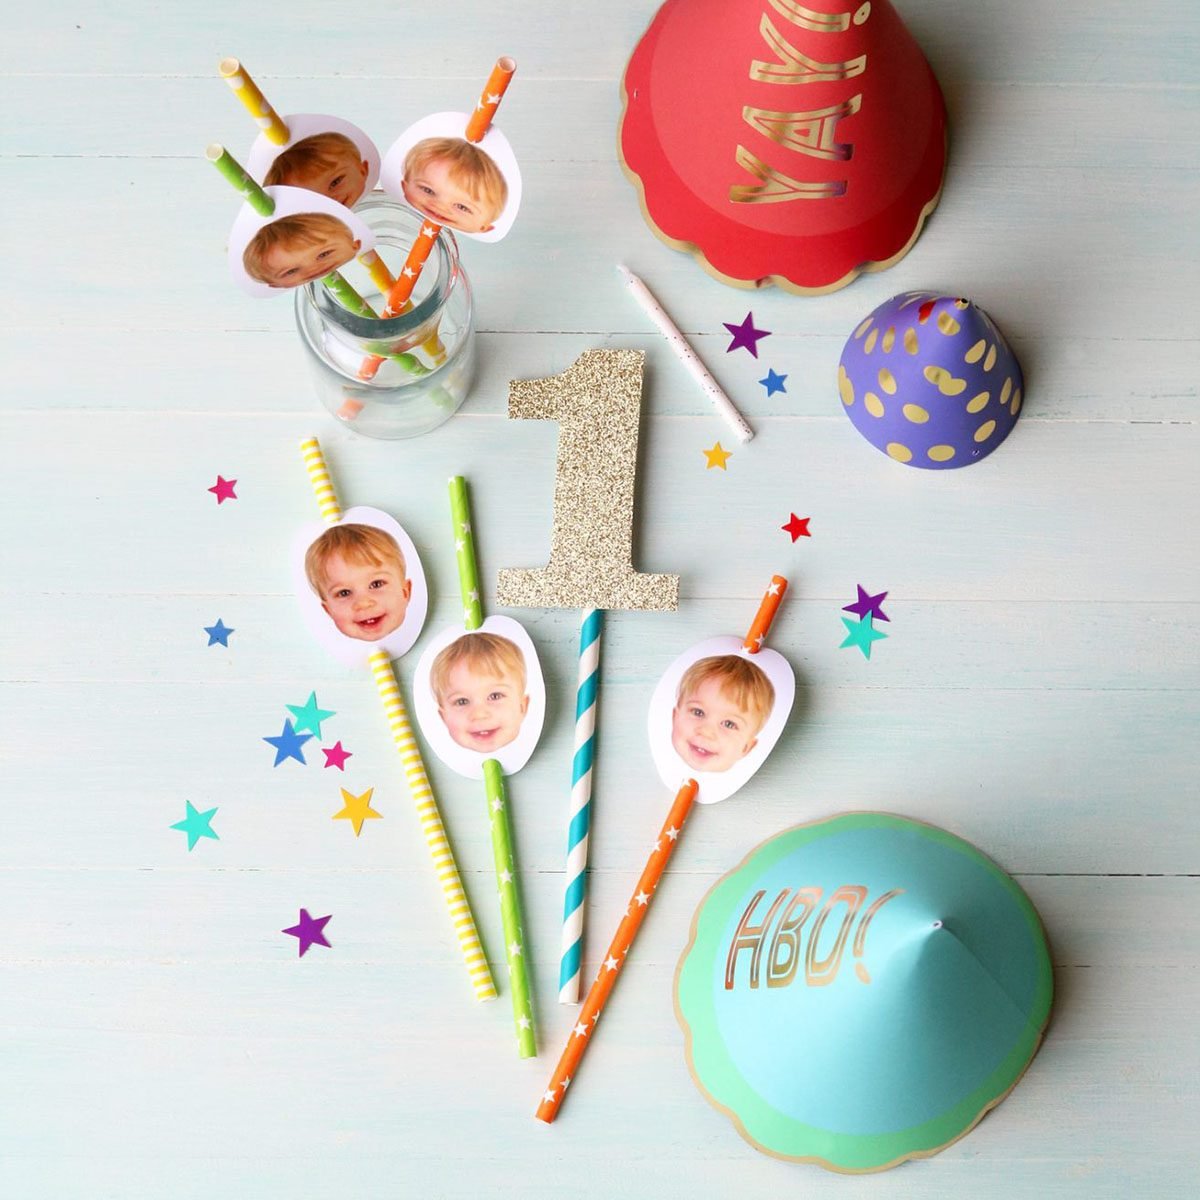 Make Your Own DIY Birthday Decorations with These Easy Ideas